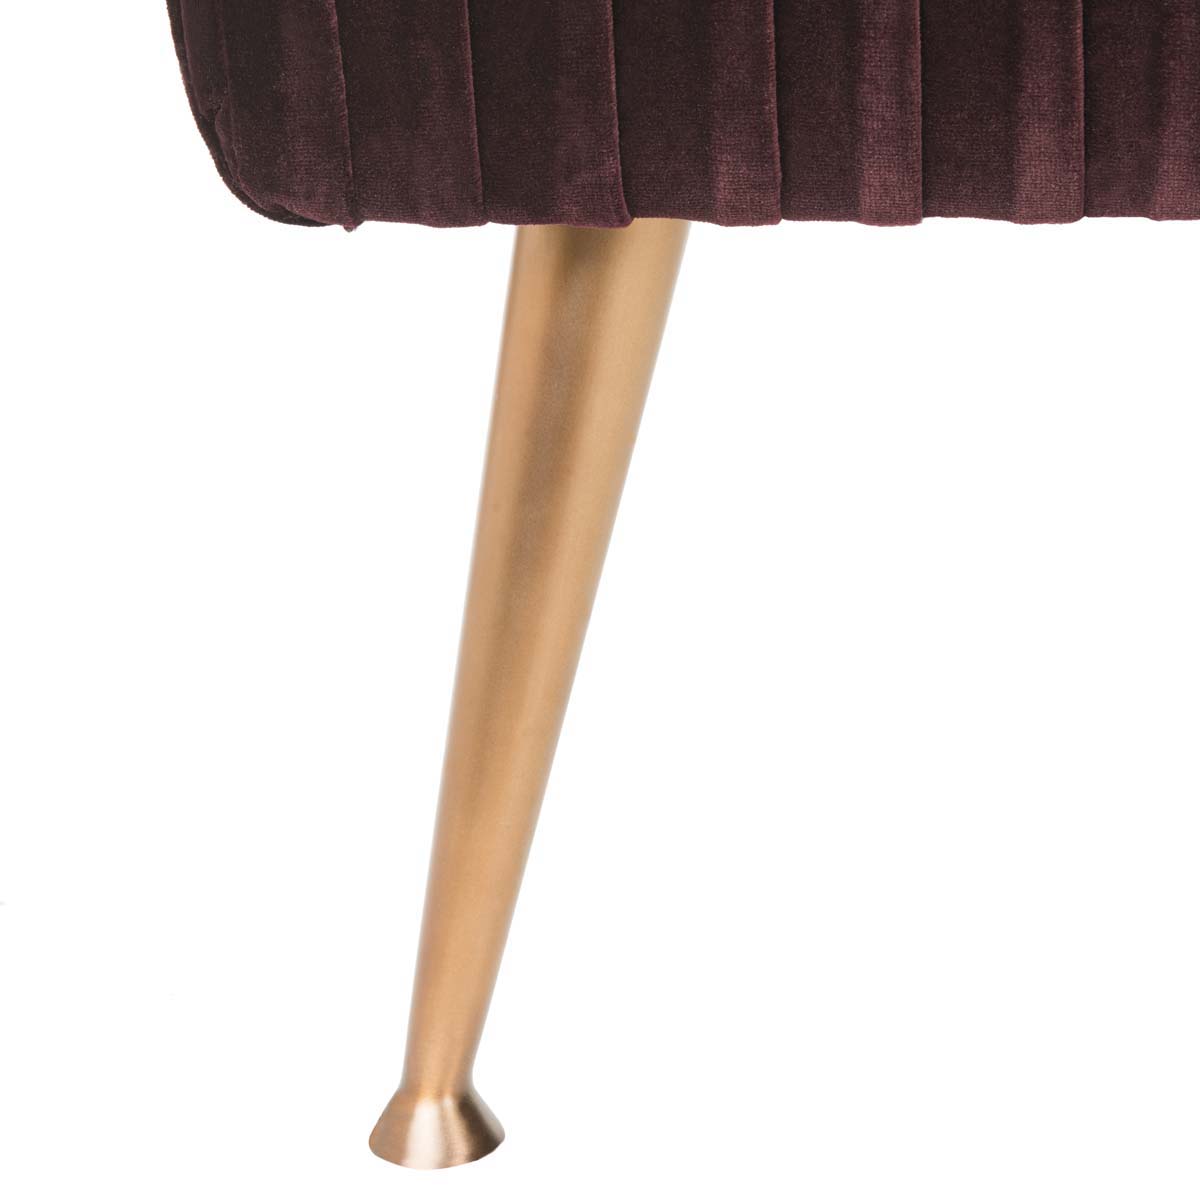 Safavieh Couture Salome Upholstered Bench - Giotto Cabernet